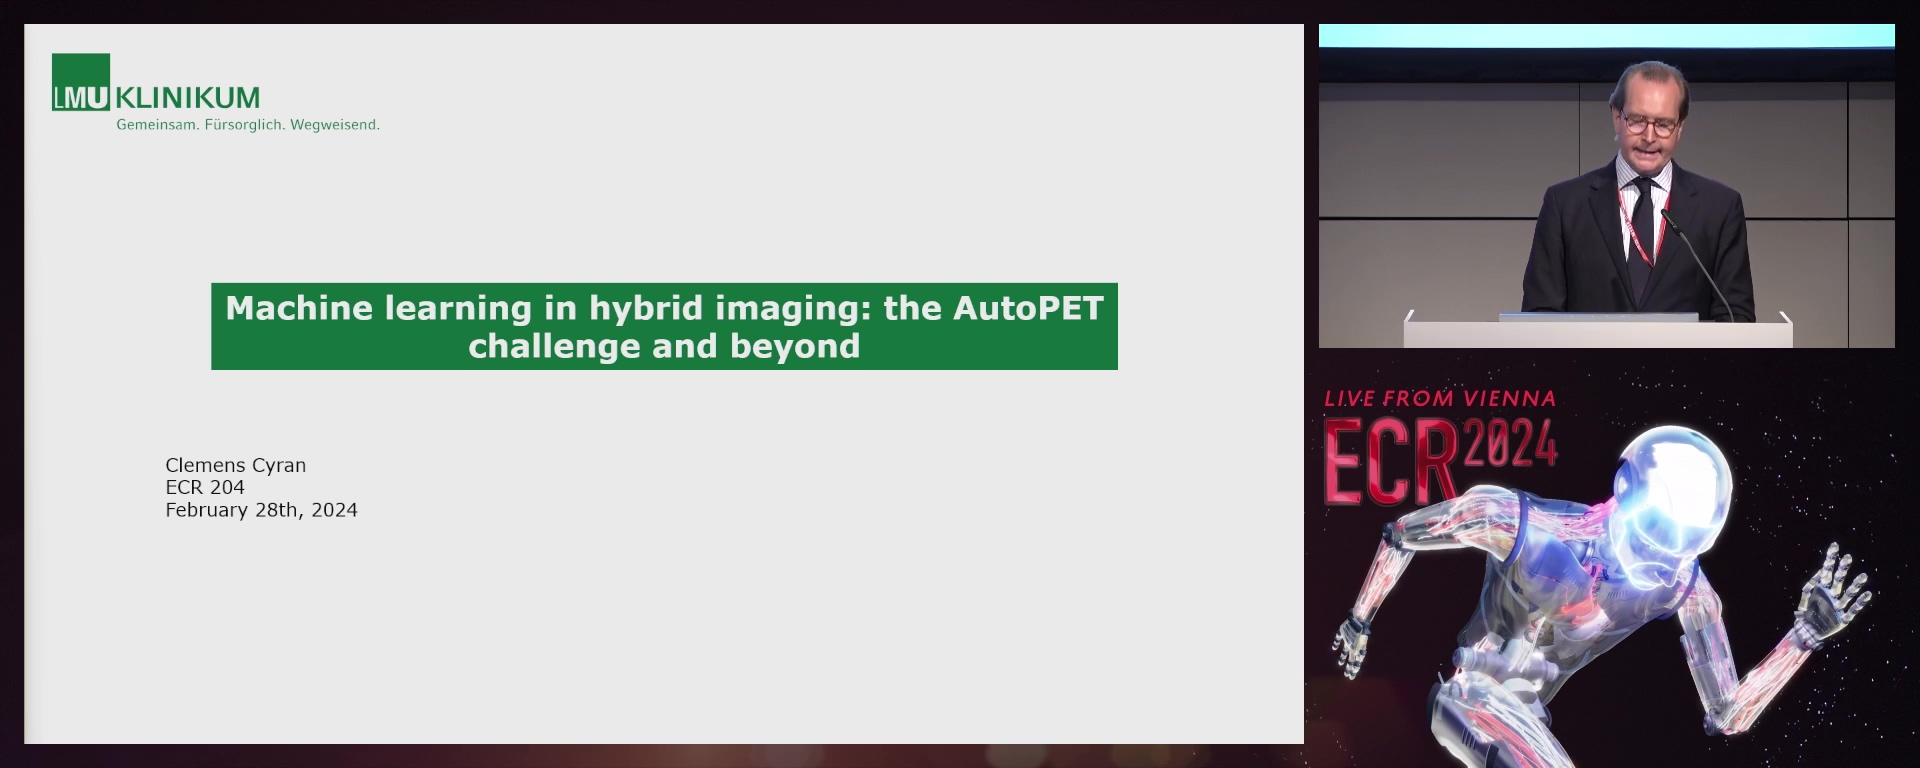 Machine learning in hybrid imaging: the AutoPET challenge and beyond